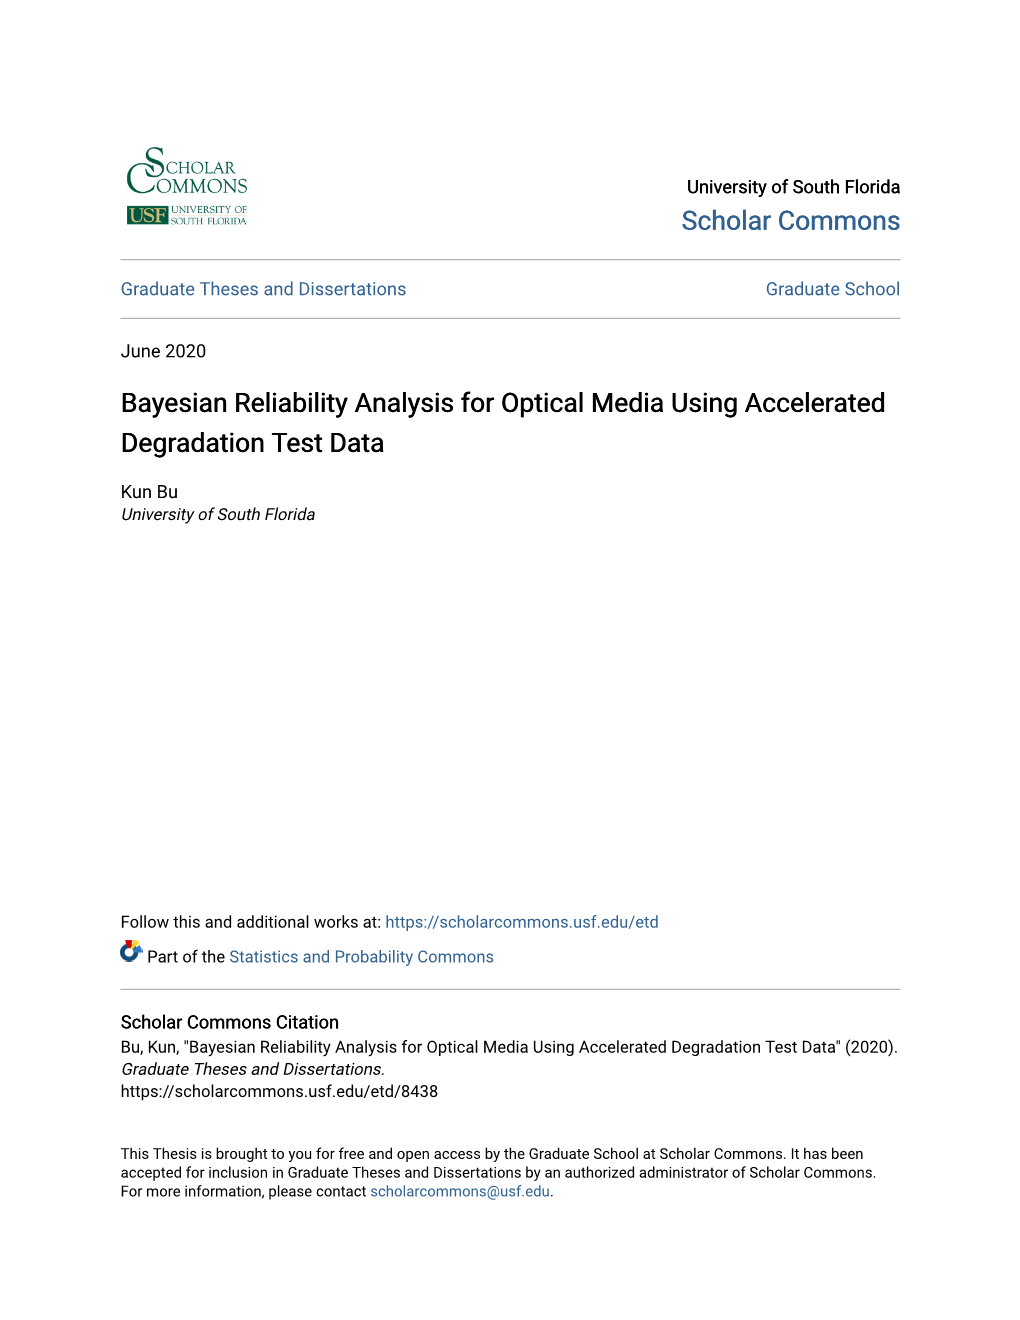 Bayesian Reliability Analysis for Optical Media Using Accelerated Degradation Test Data